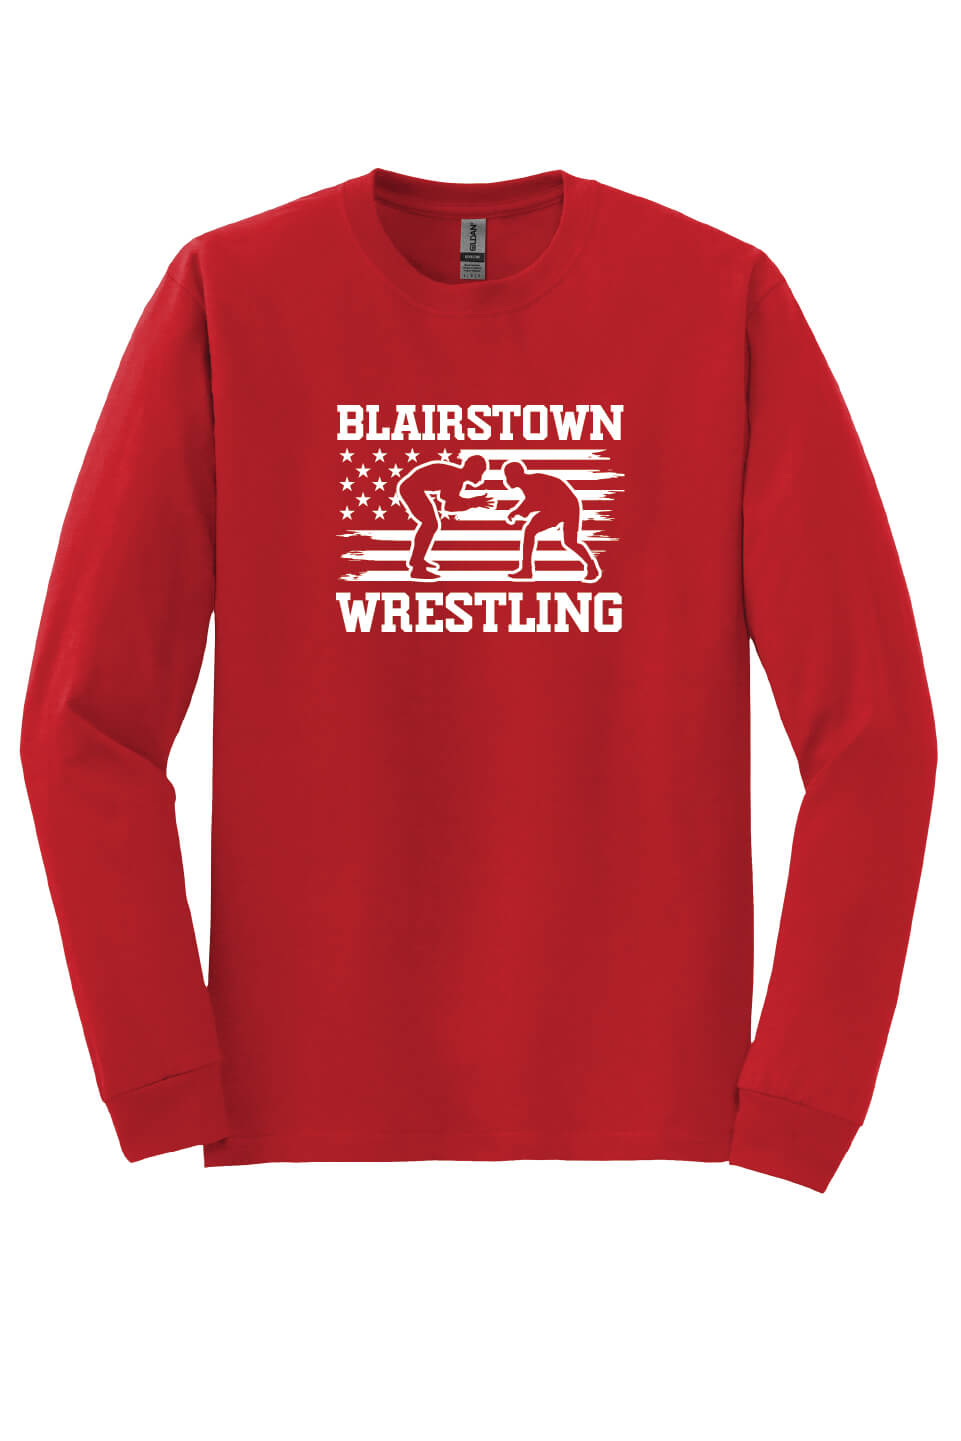 Blairstown Wrestling Flag Long Sleeve T-Shirt (Youth) red